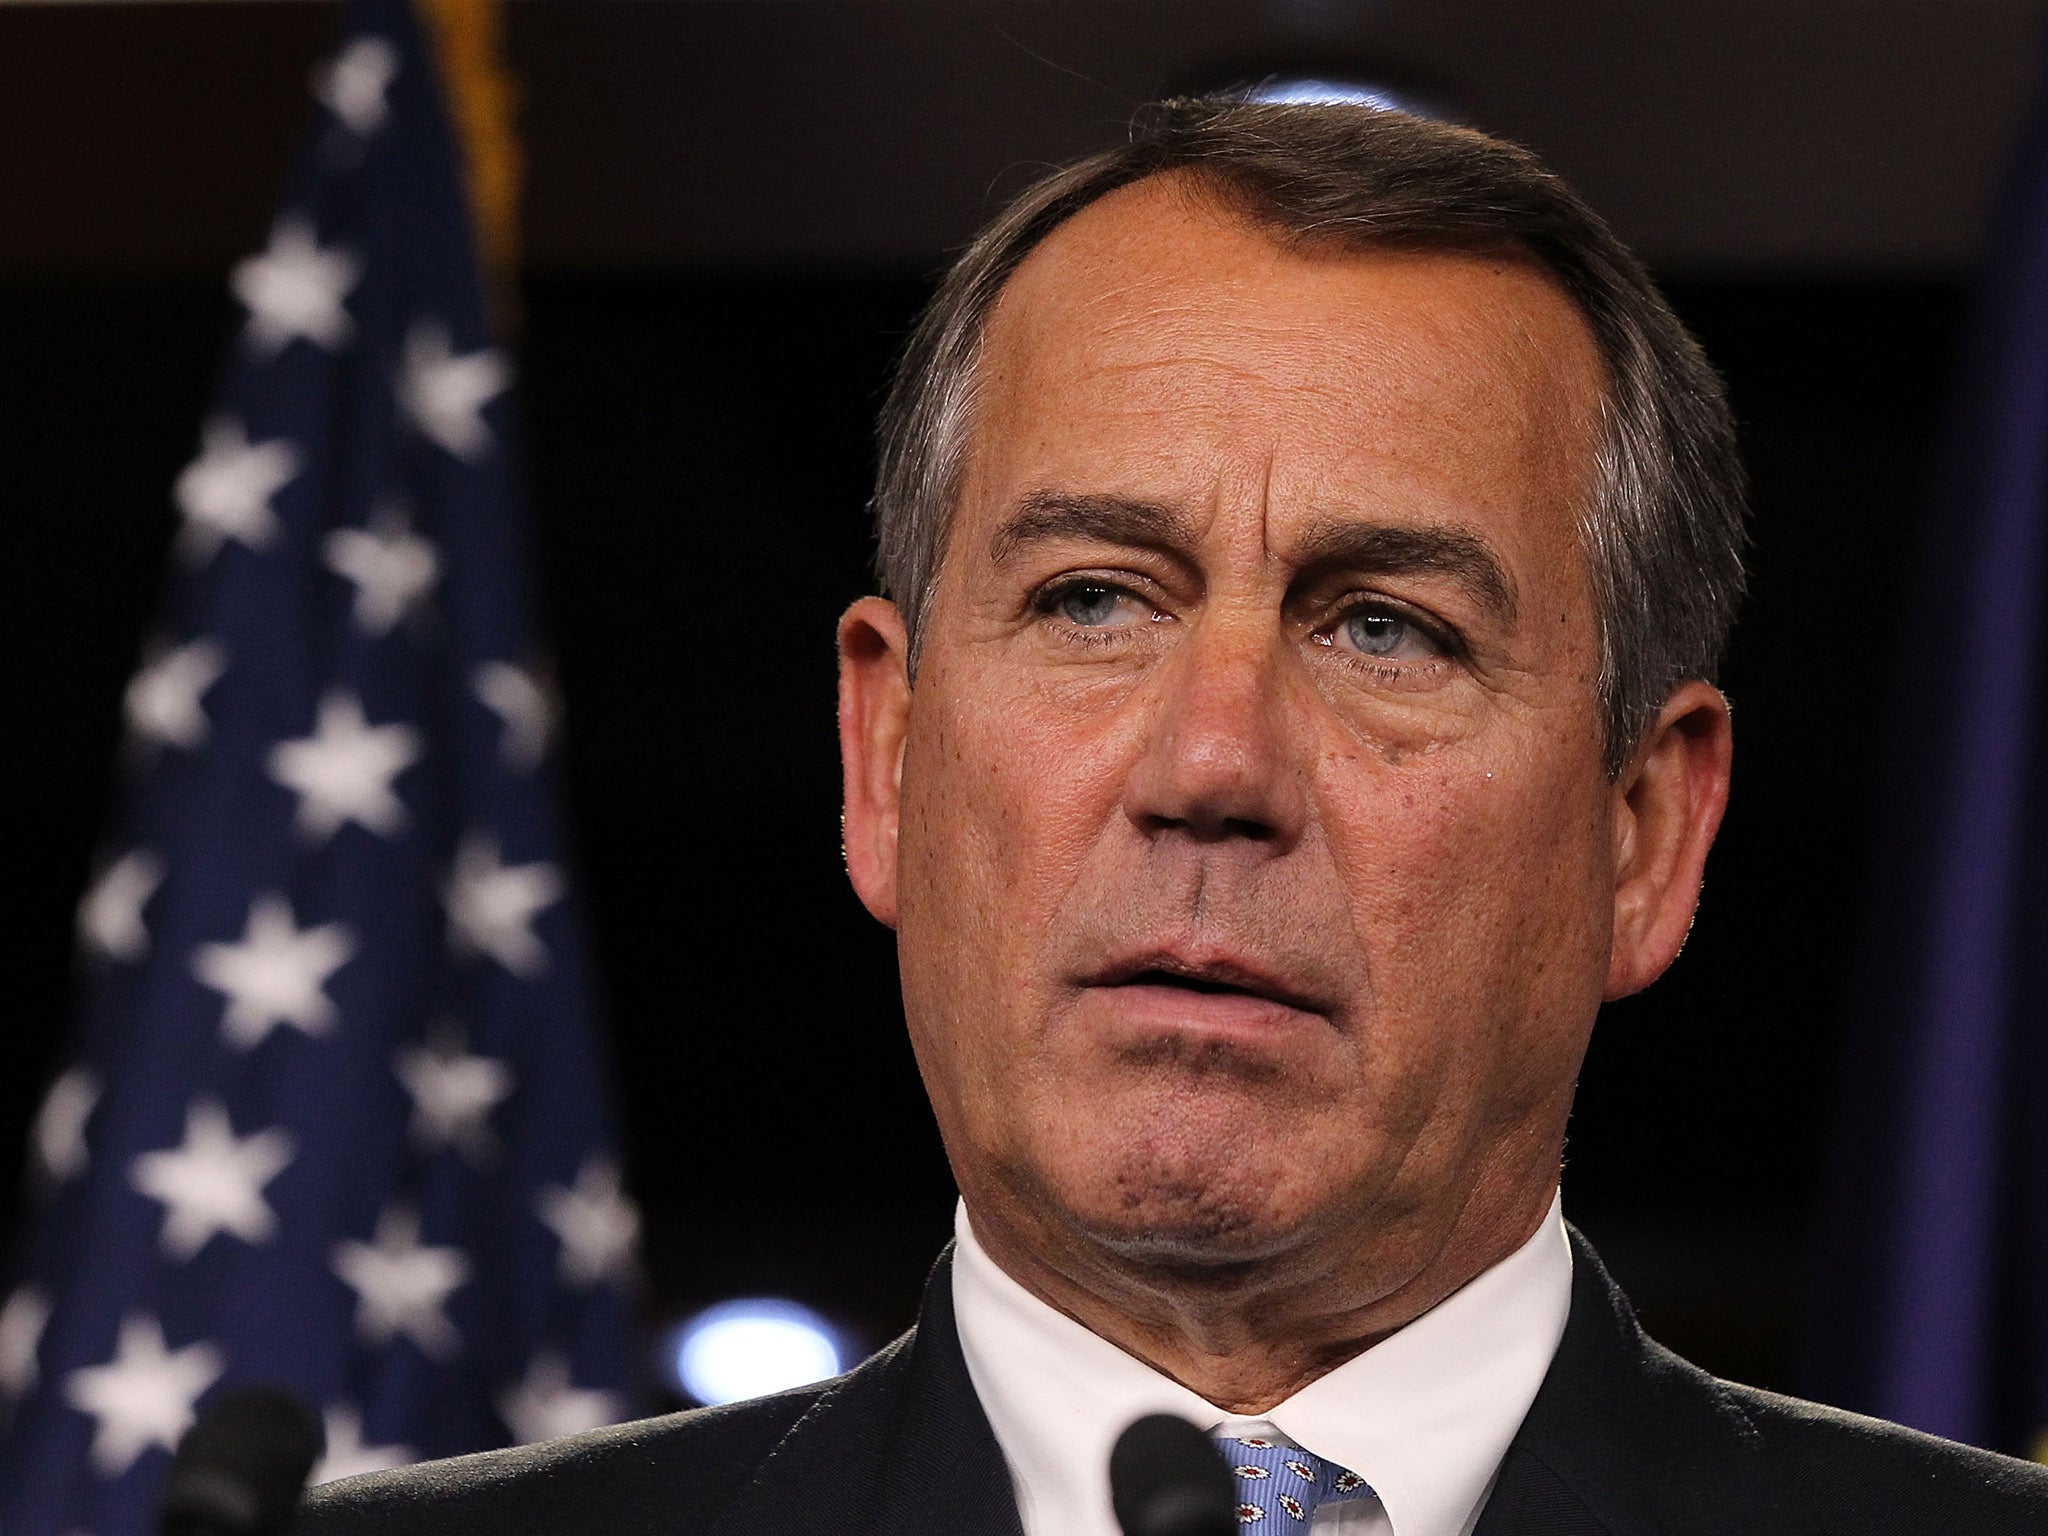 Speaker of the House of Representatives John Boehner, found itself without enough backing on its own side after a number of GOP representatives defected at the last minute